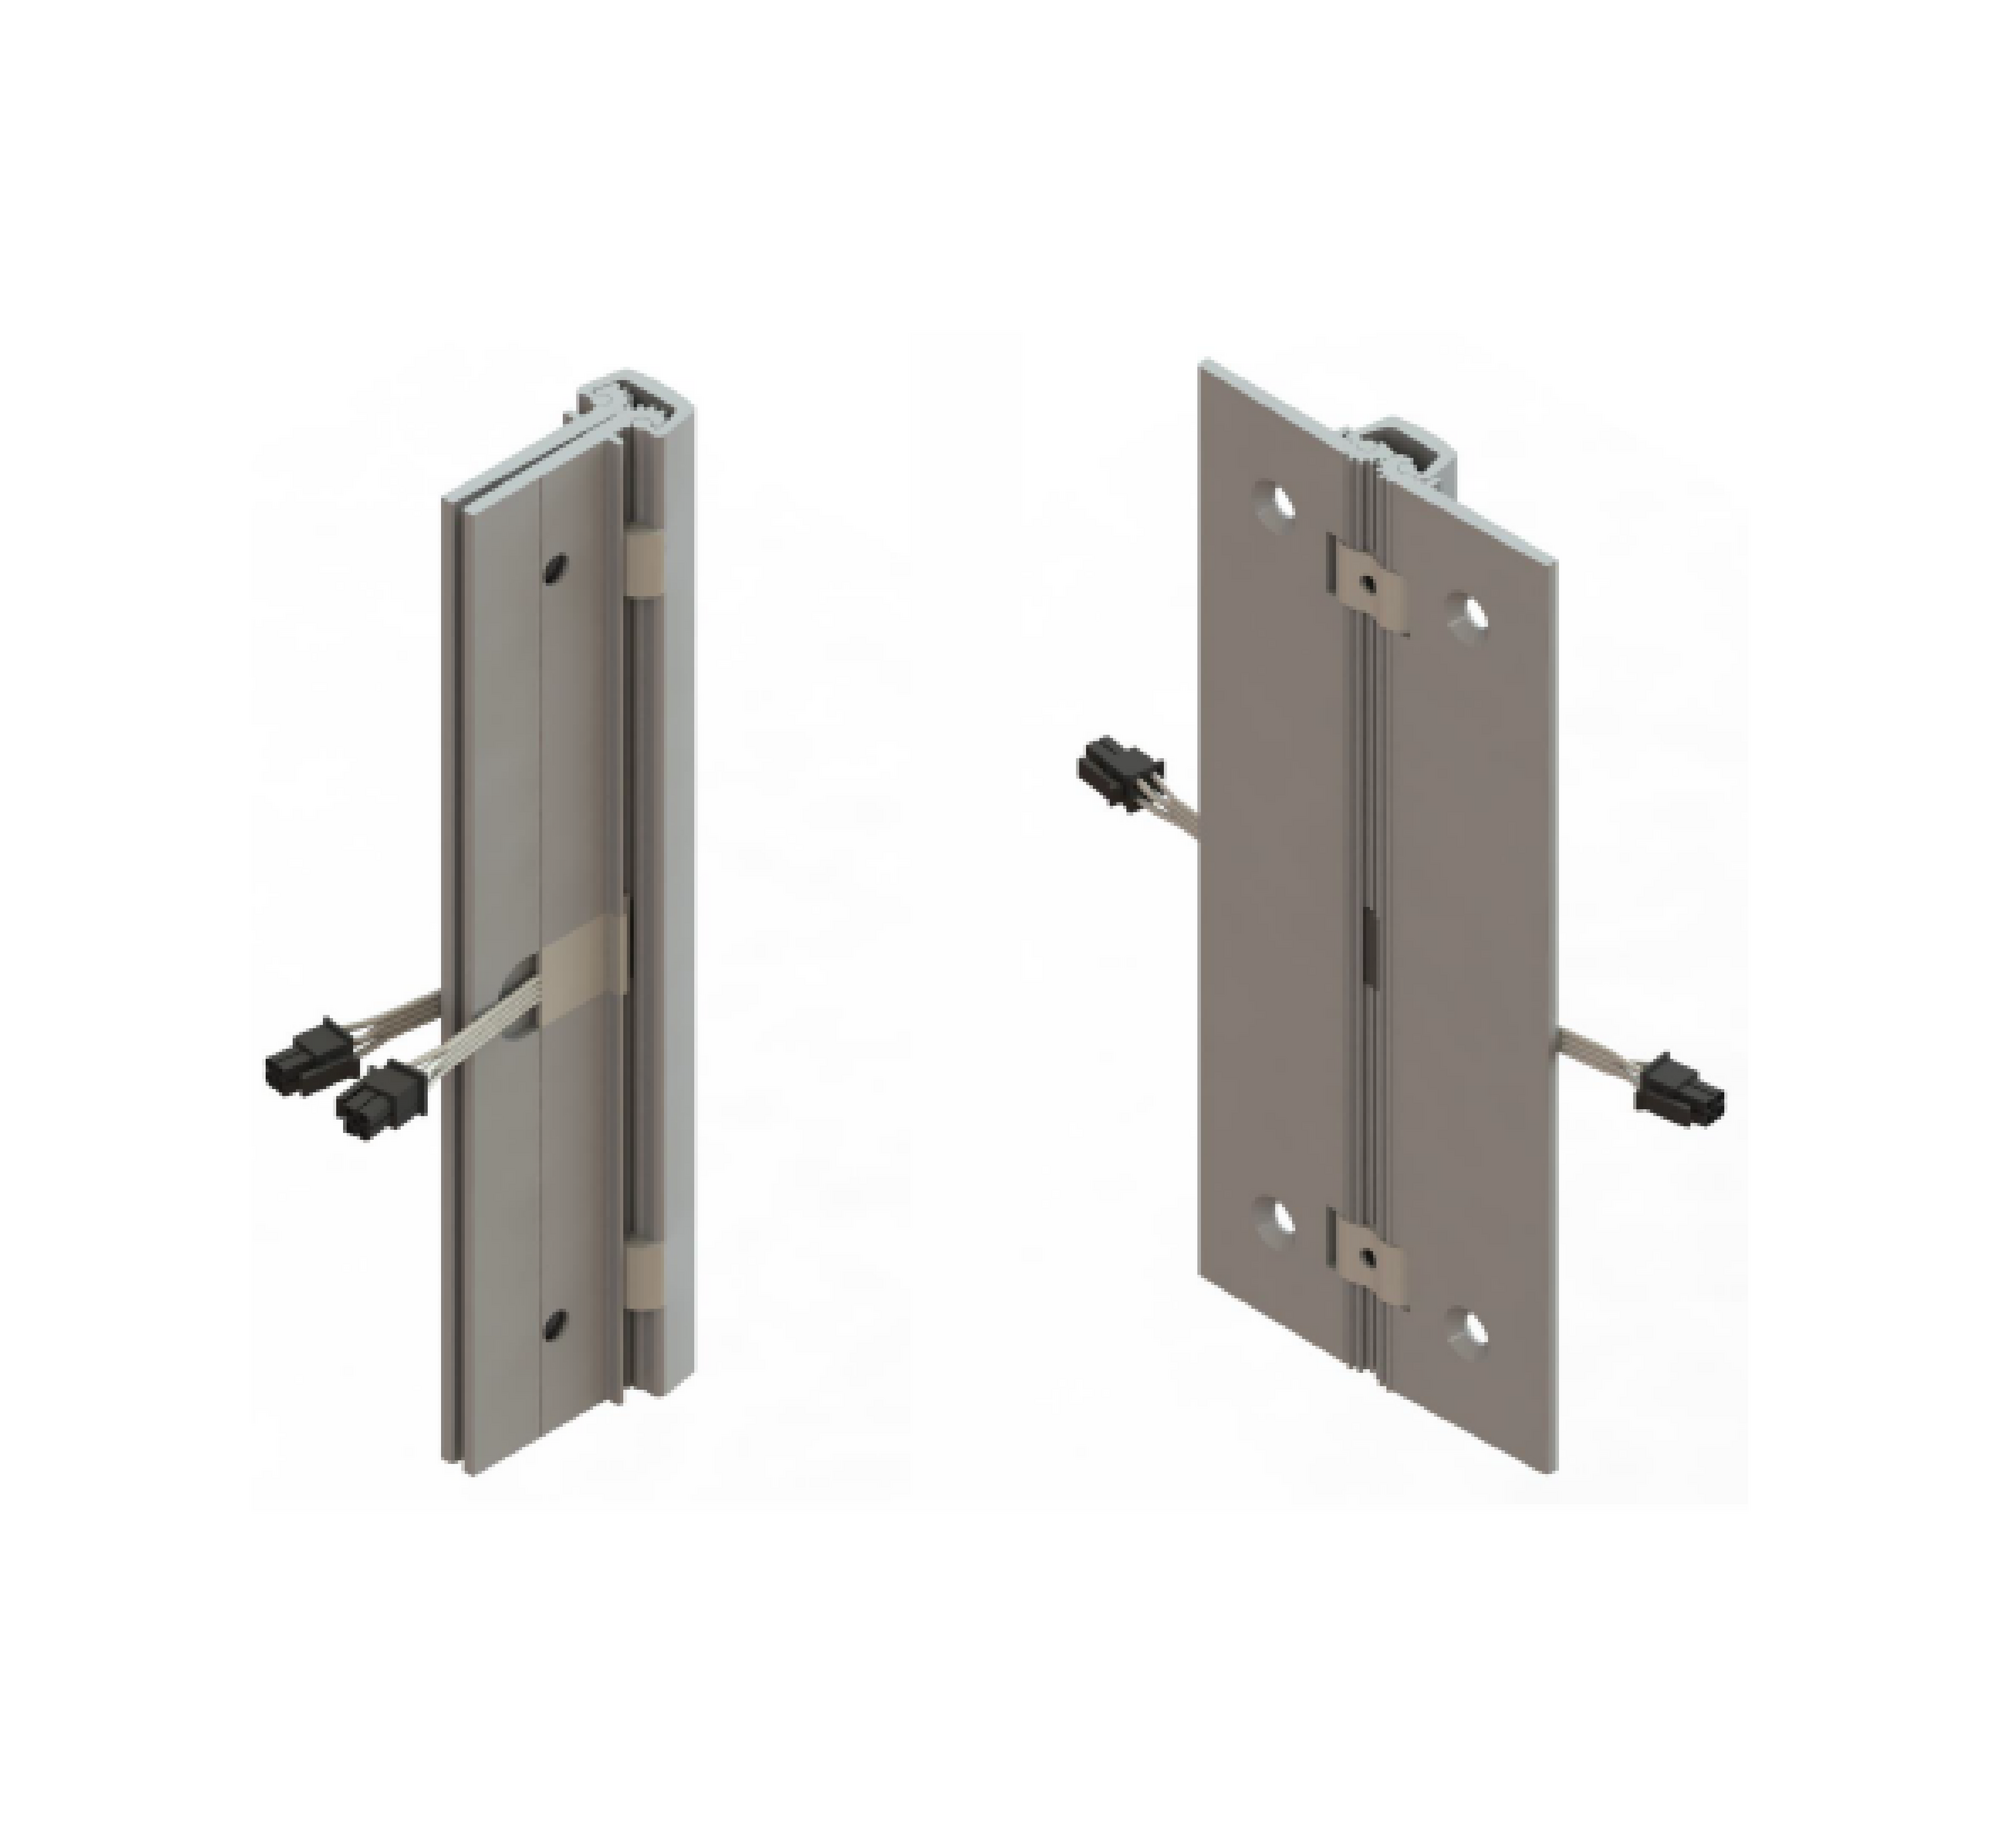 Electrically Modified Hinge, Mental Health Safety Products